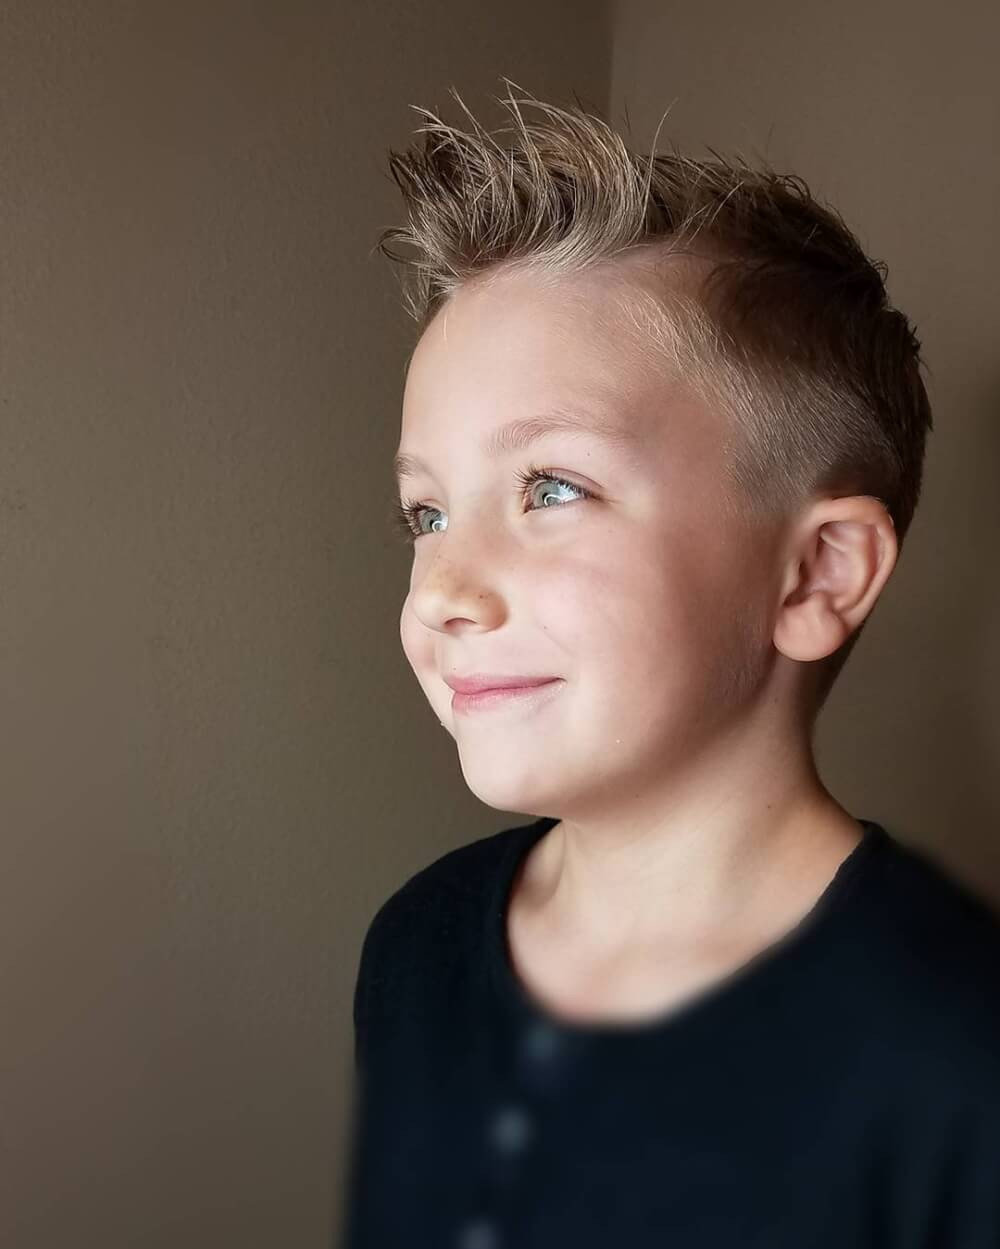 New Hairstyles For Boys
 28 Coolest Boys Haircuts for School in 2019